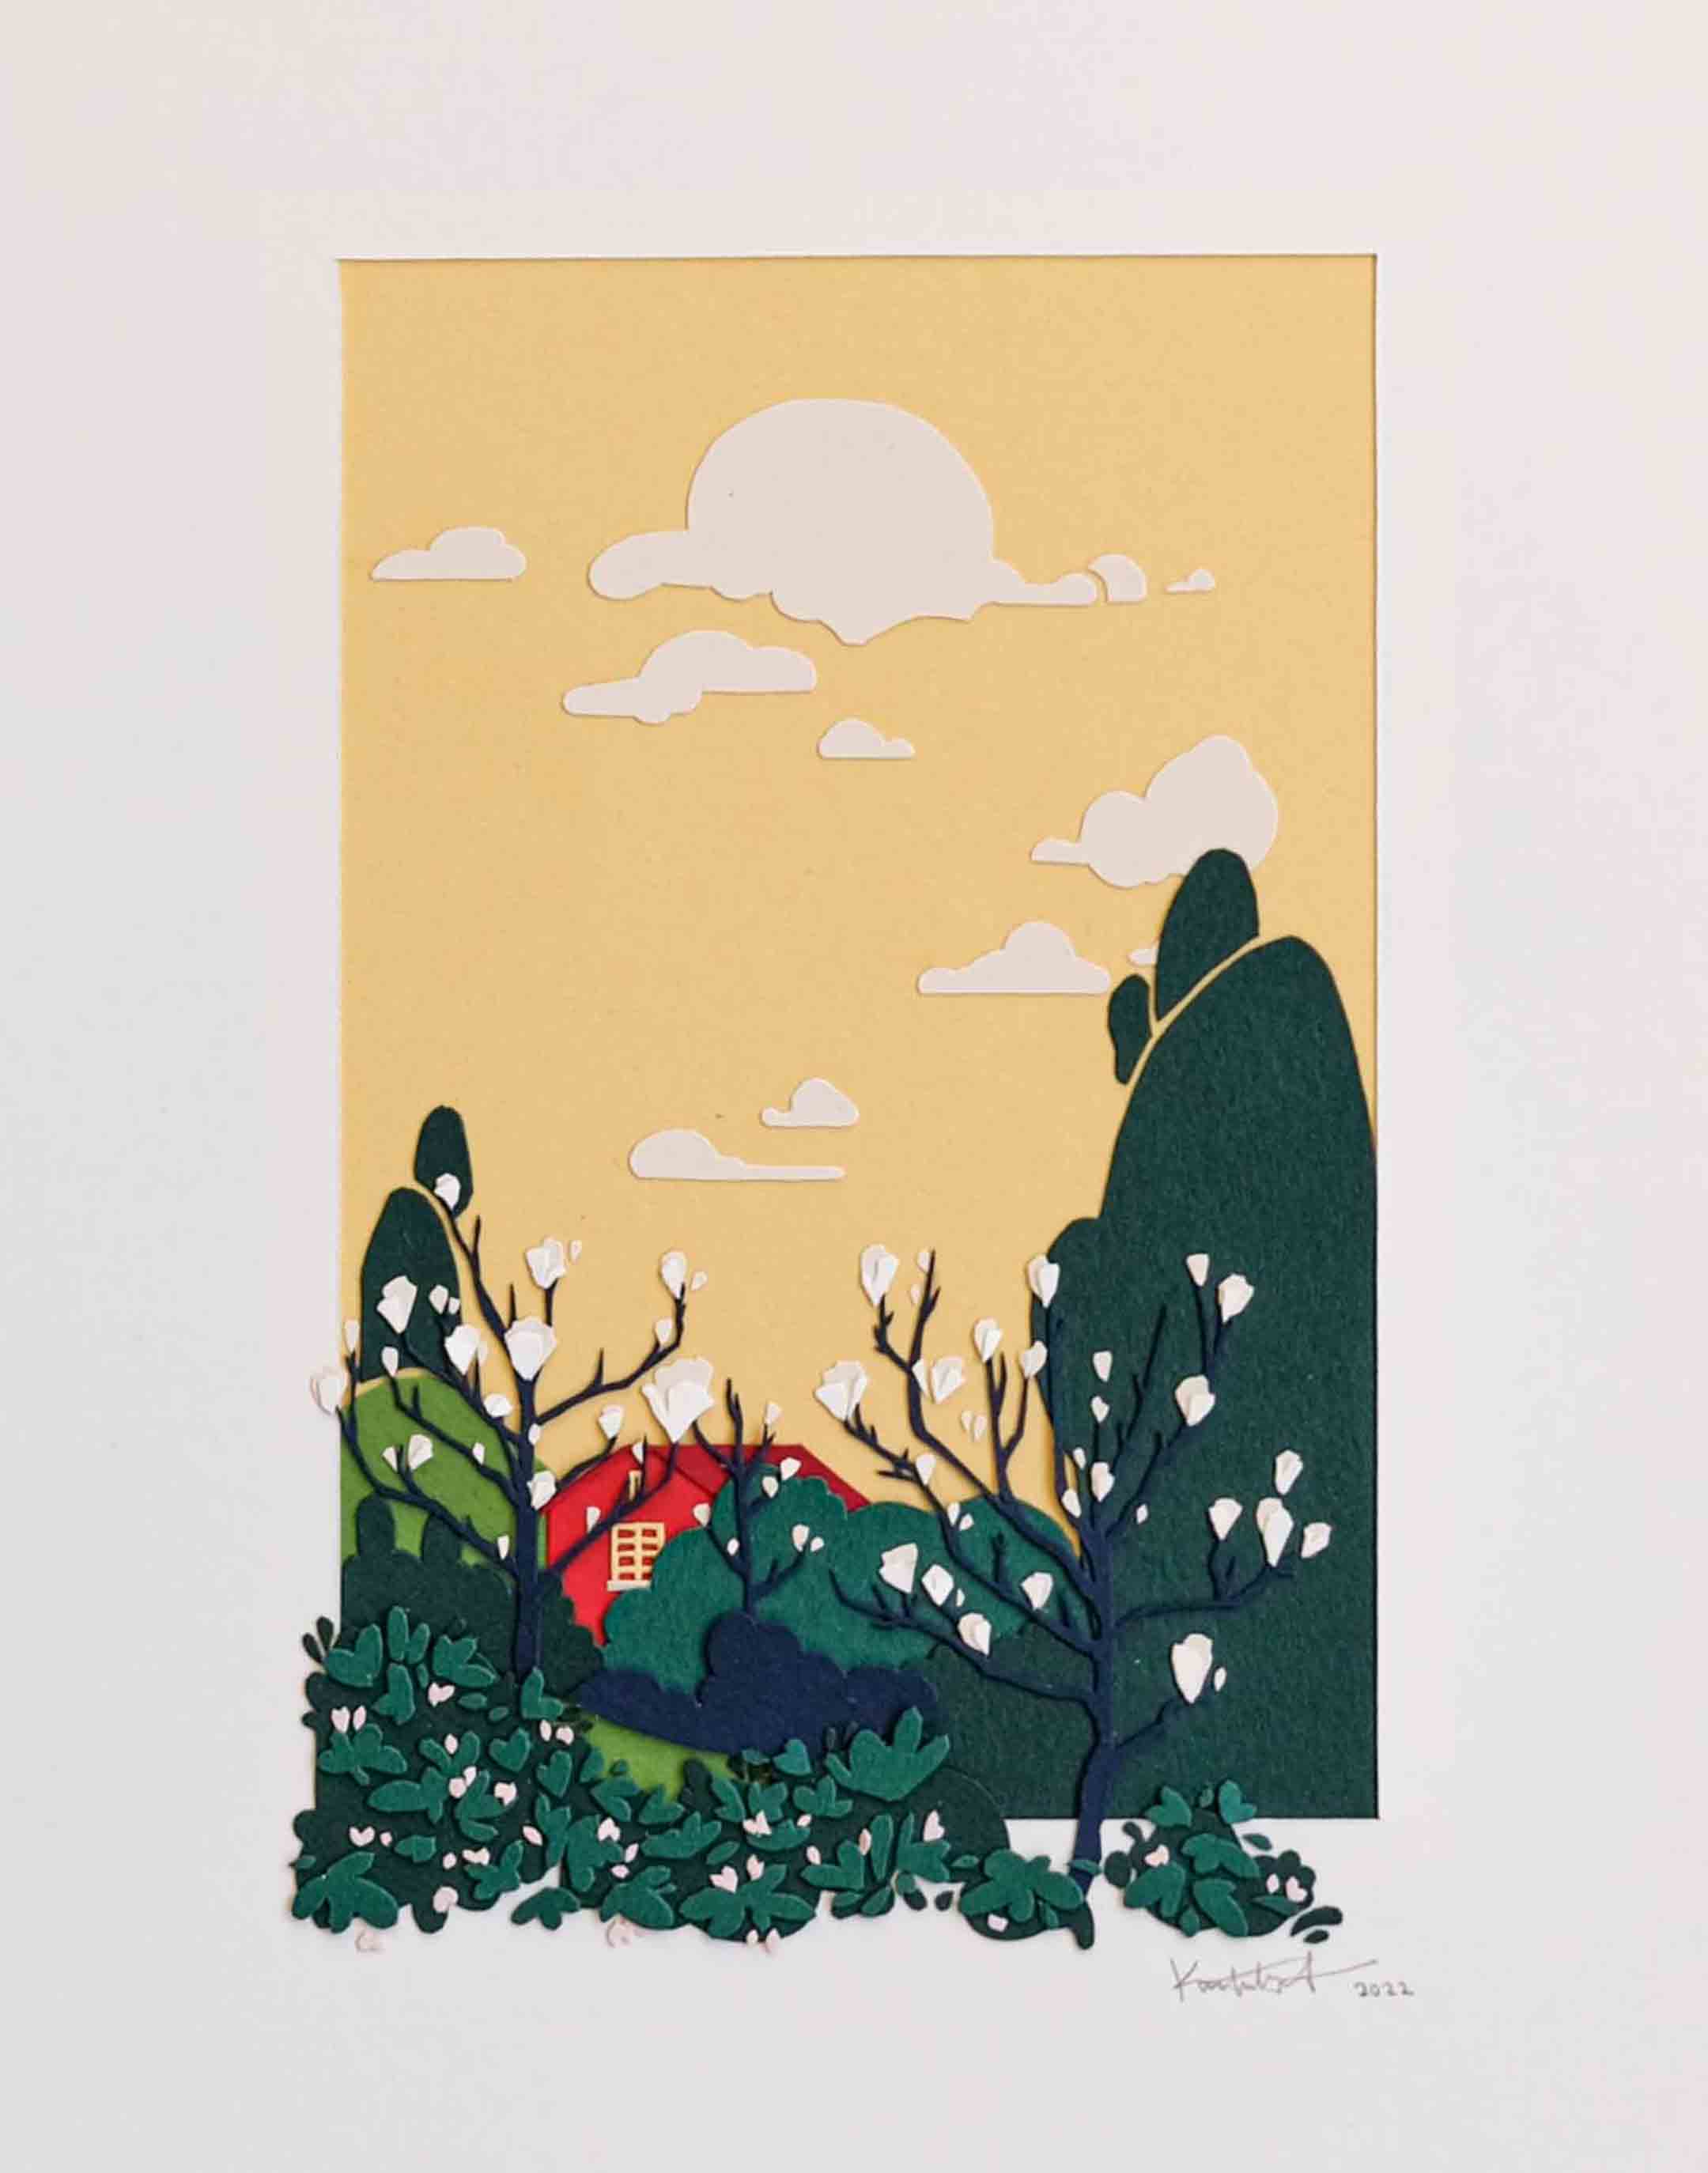 Layers of cut paper depict a red house against a warm yellow sky behind a grove of magnolia blossoms and other trees. It sits in a white mat, with some of the trees and plants spilling out of the mat opening.